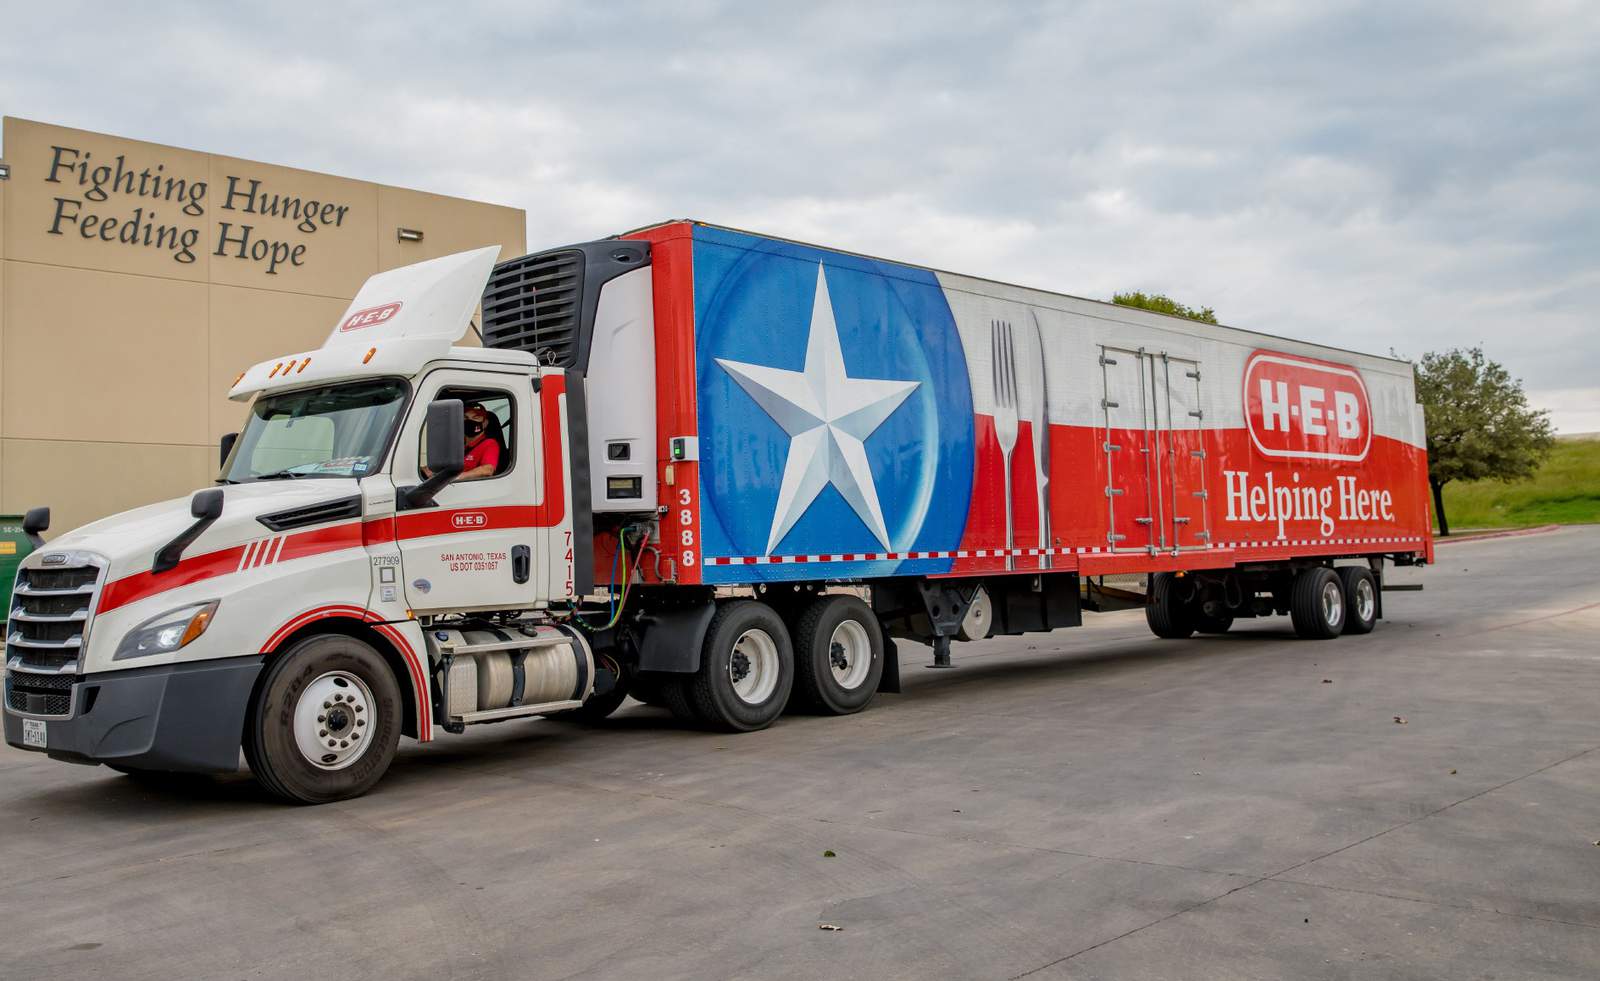 H-E-B donates $1 million to Texas food banks to help those in need after winter storm